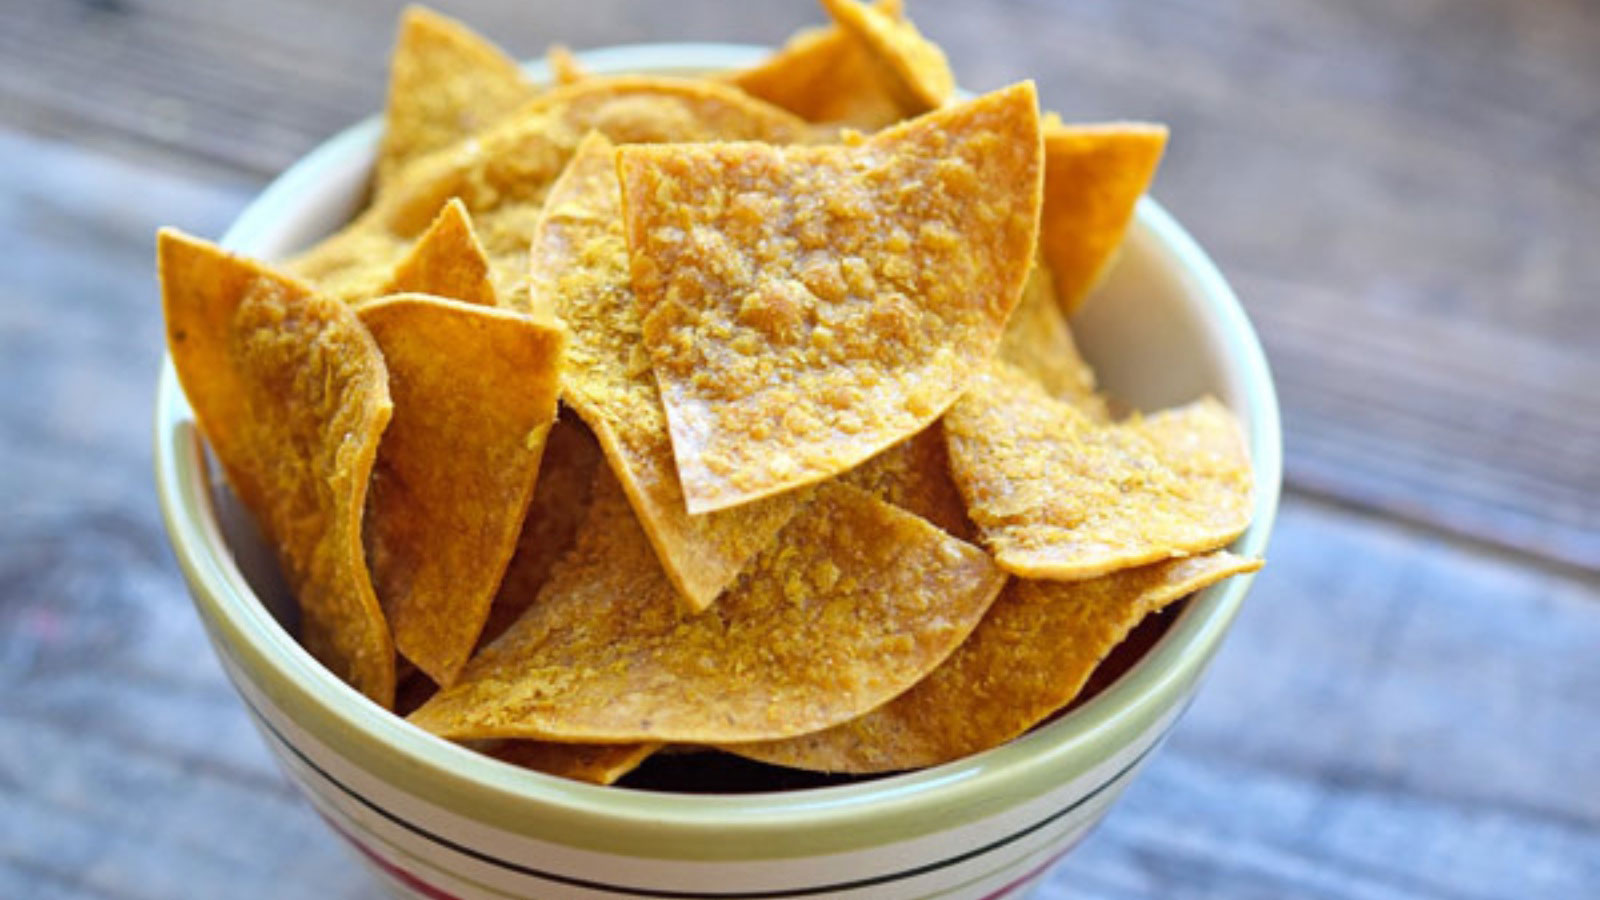 <p>These tasty homemade chips allow you to indulge in a guilty pleasure with none of the guilt. That’s right, these <a href="https://www.thegraciouspantry.com/clean-eating-doritos/">homemade cheesy chips</a> are delicious, and they aren’t filled with disgusting chemicals and unpronounceable ingredients…just amazing cheesy flavor that you are going to love.  </p>